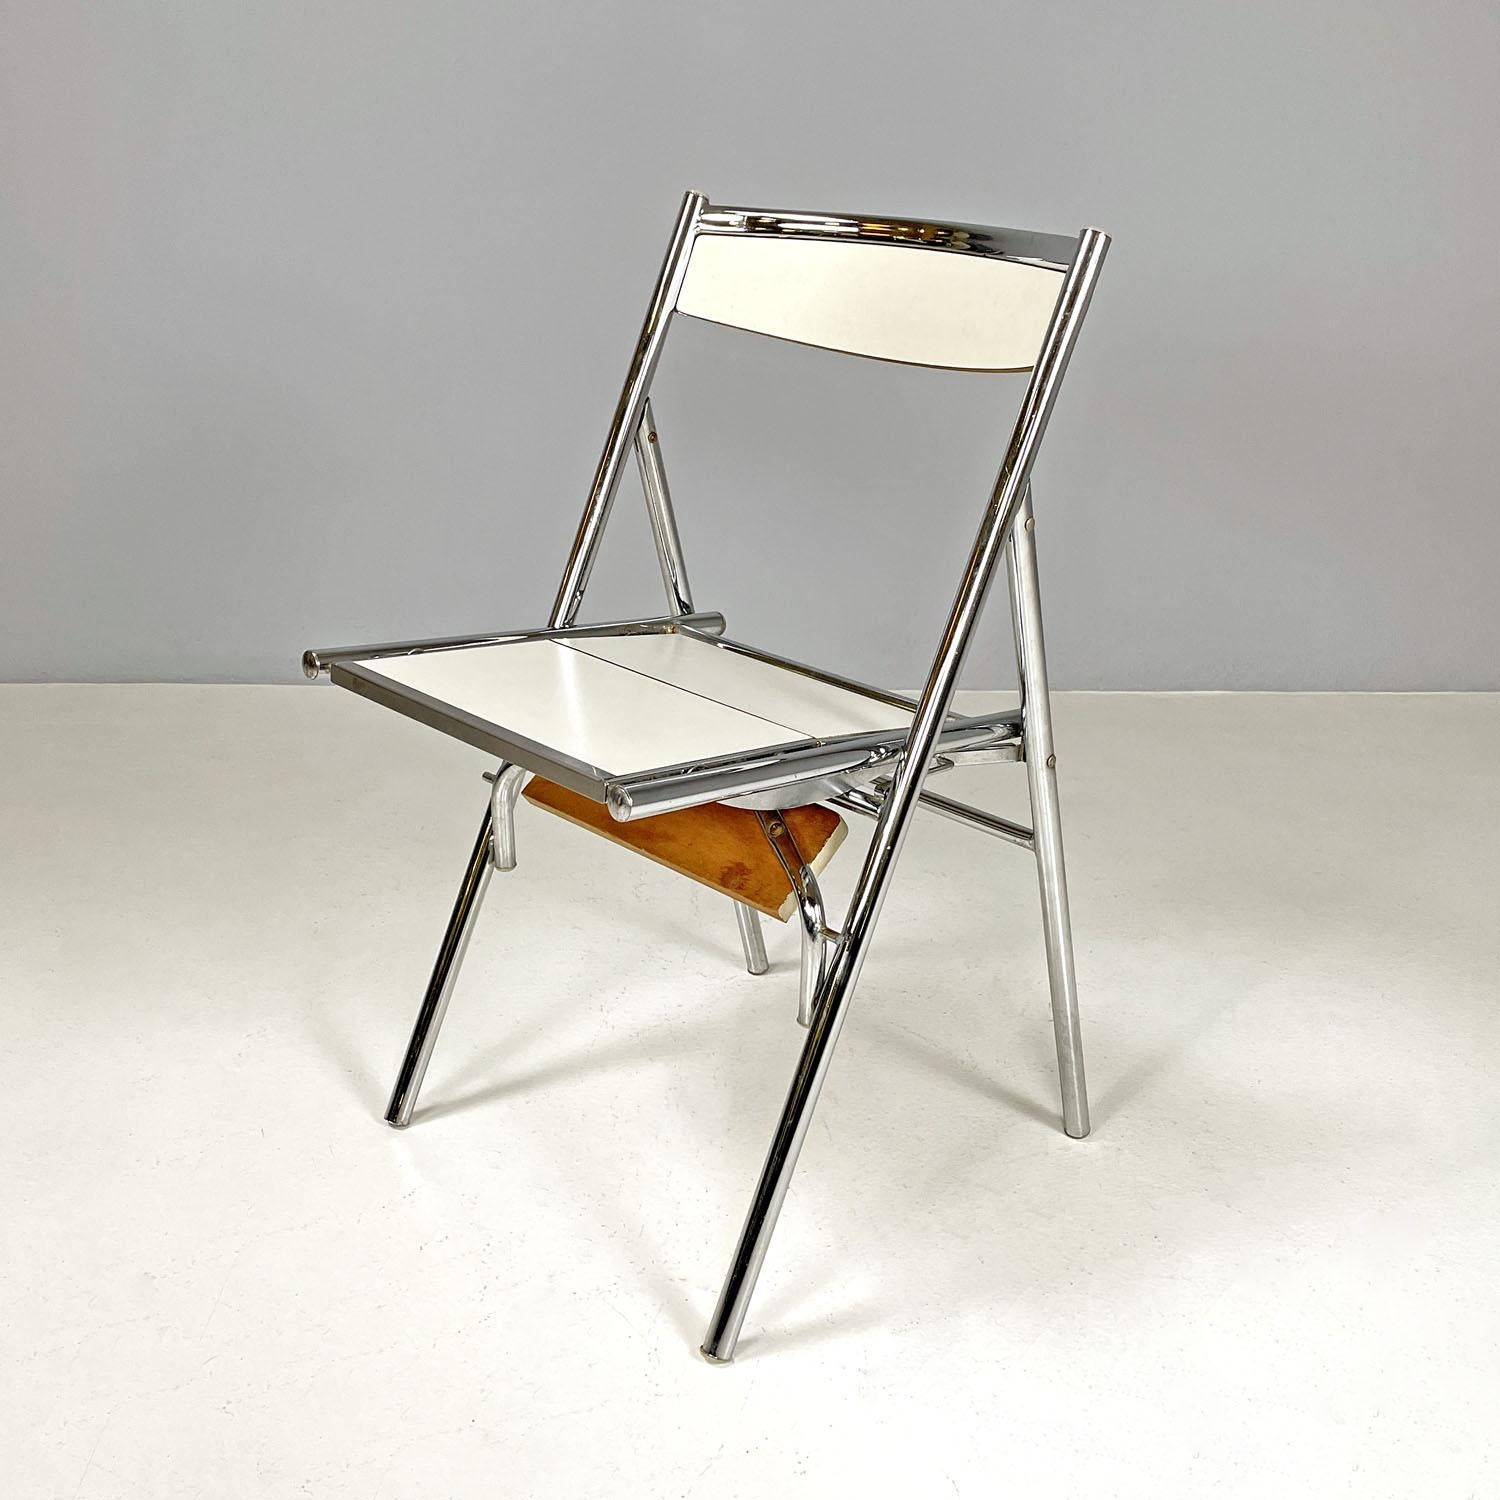 Italian modern steel and white laminate chair convertible into a ladder, 1970s
Chair convertible into ladder. The structure is in chromed metal and the seat and backrest, as well as the steps, are in white formica. By moving elements of the